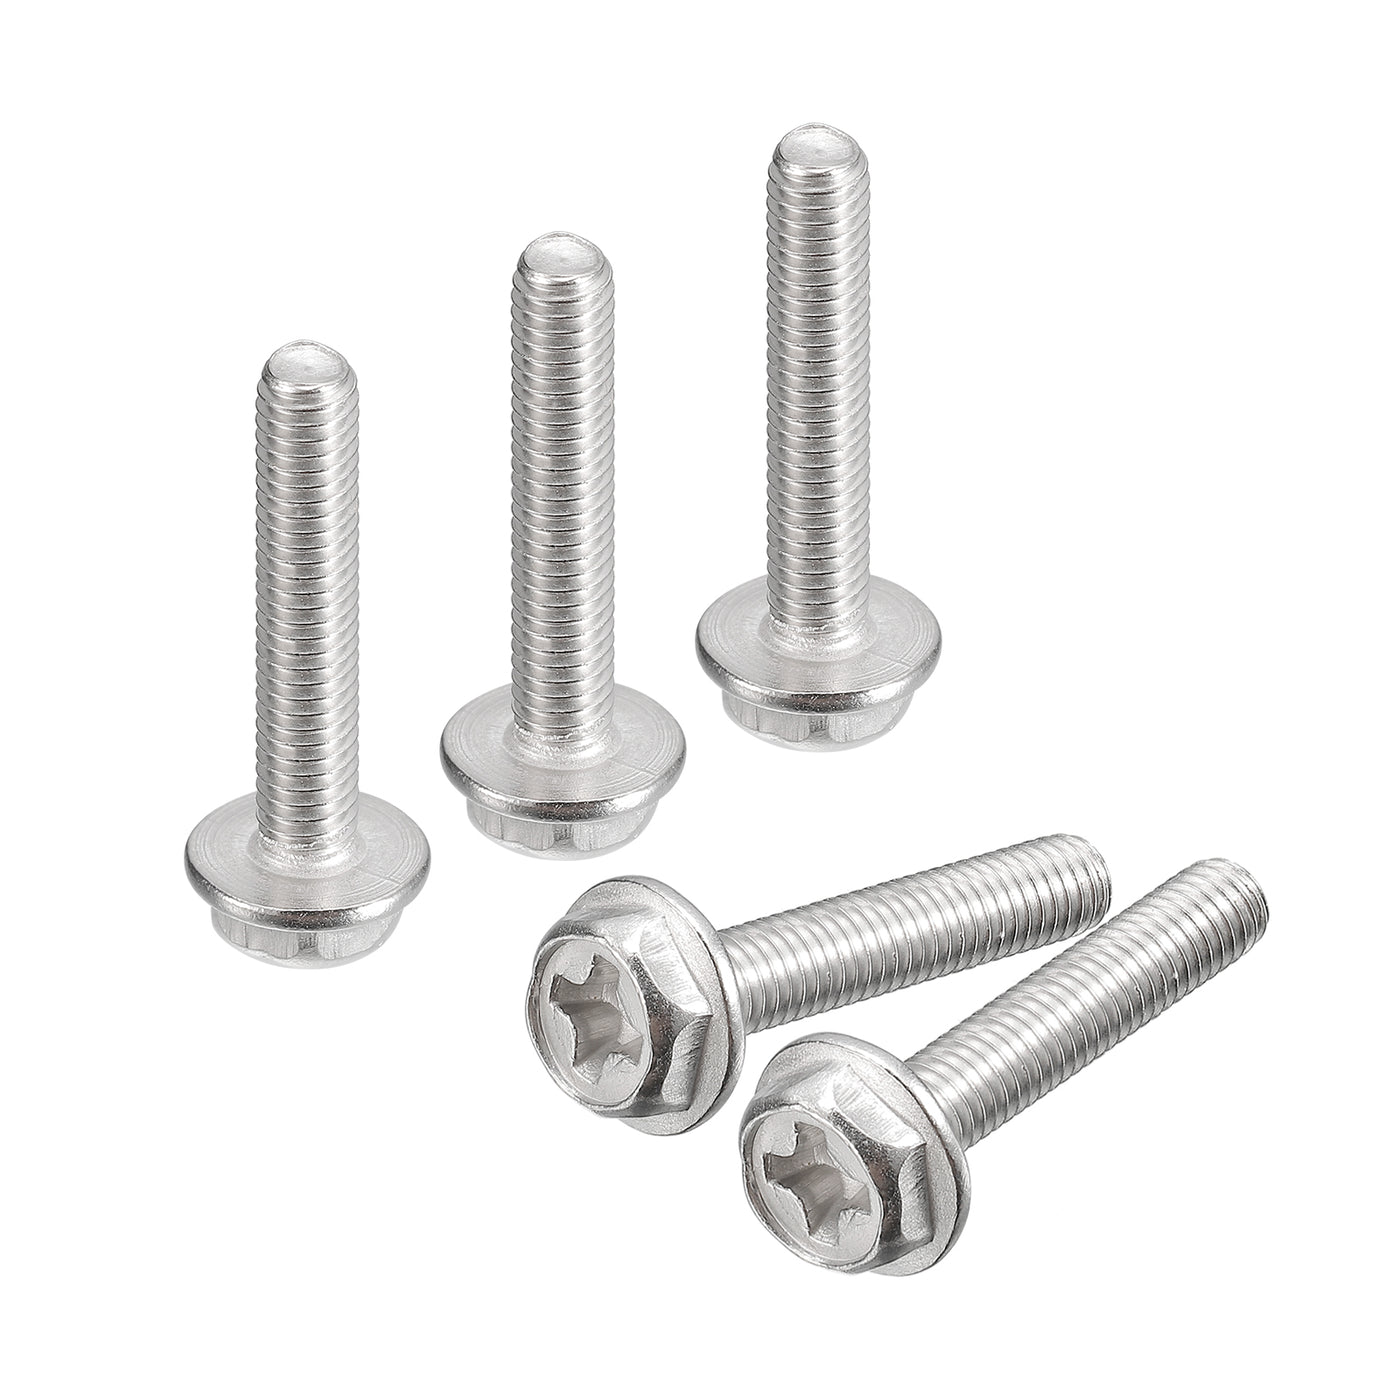 uxcell Uxcell Phillips Hex Head Flange Bolts, 304 Stainless Steel Hexagon Phillips Flange Hex Bolts Machine Screws